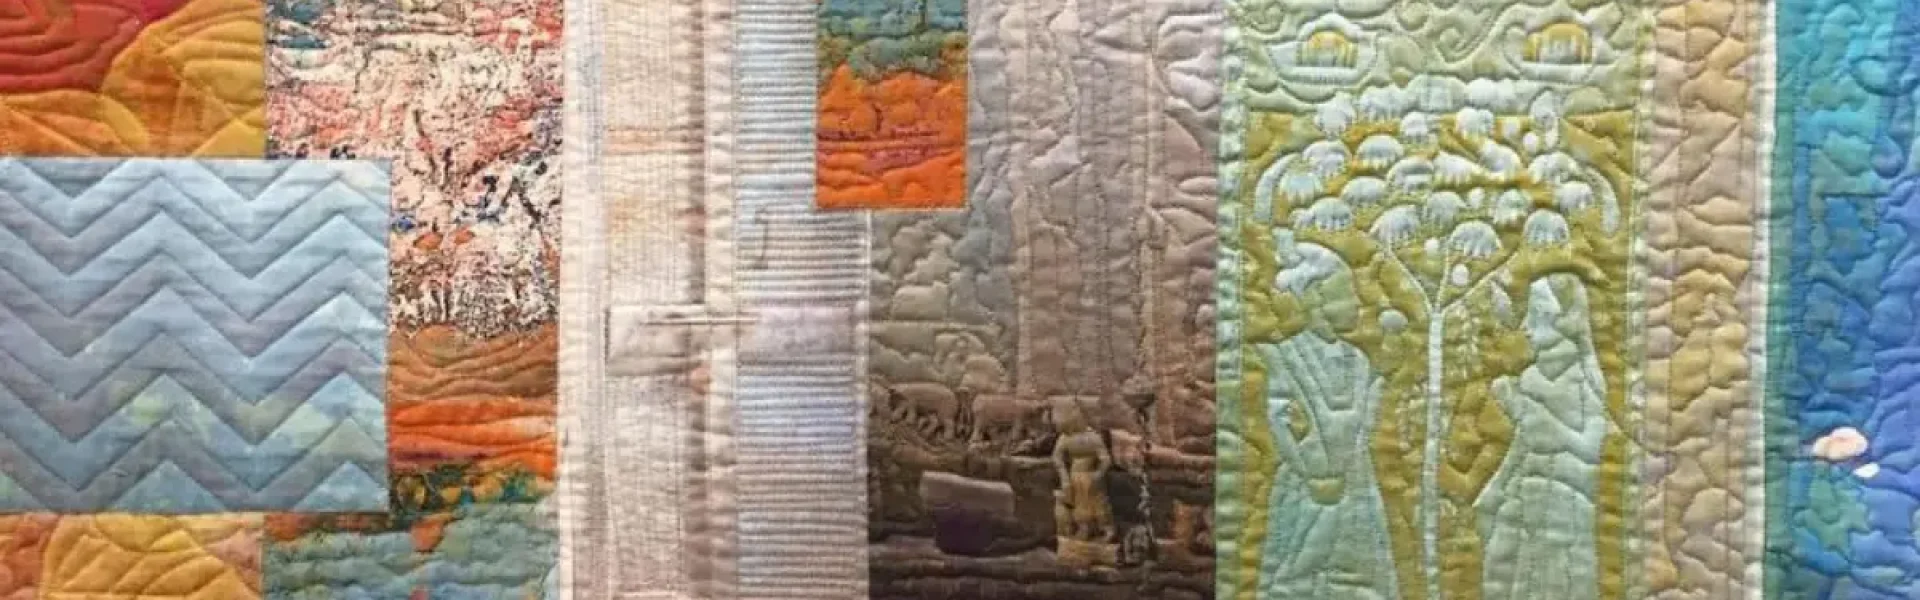 Michael James. The distinguished voice in Quilt Art.